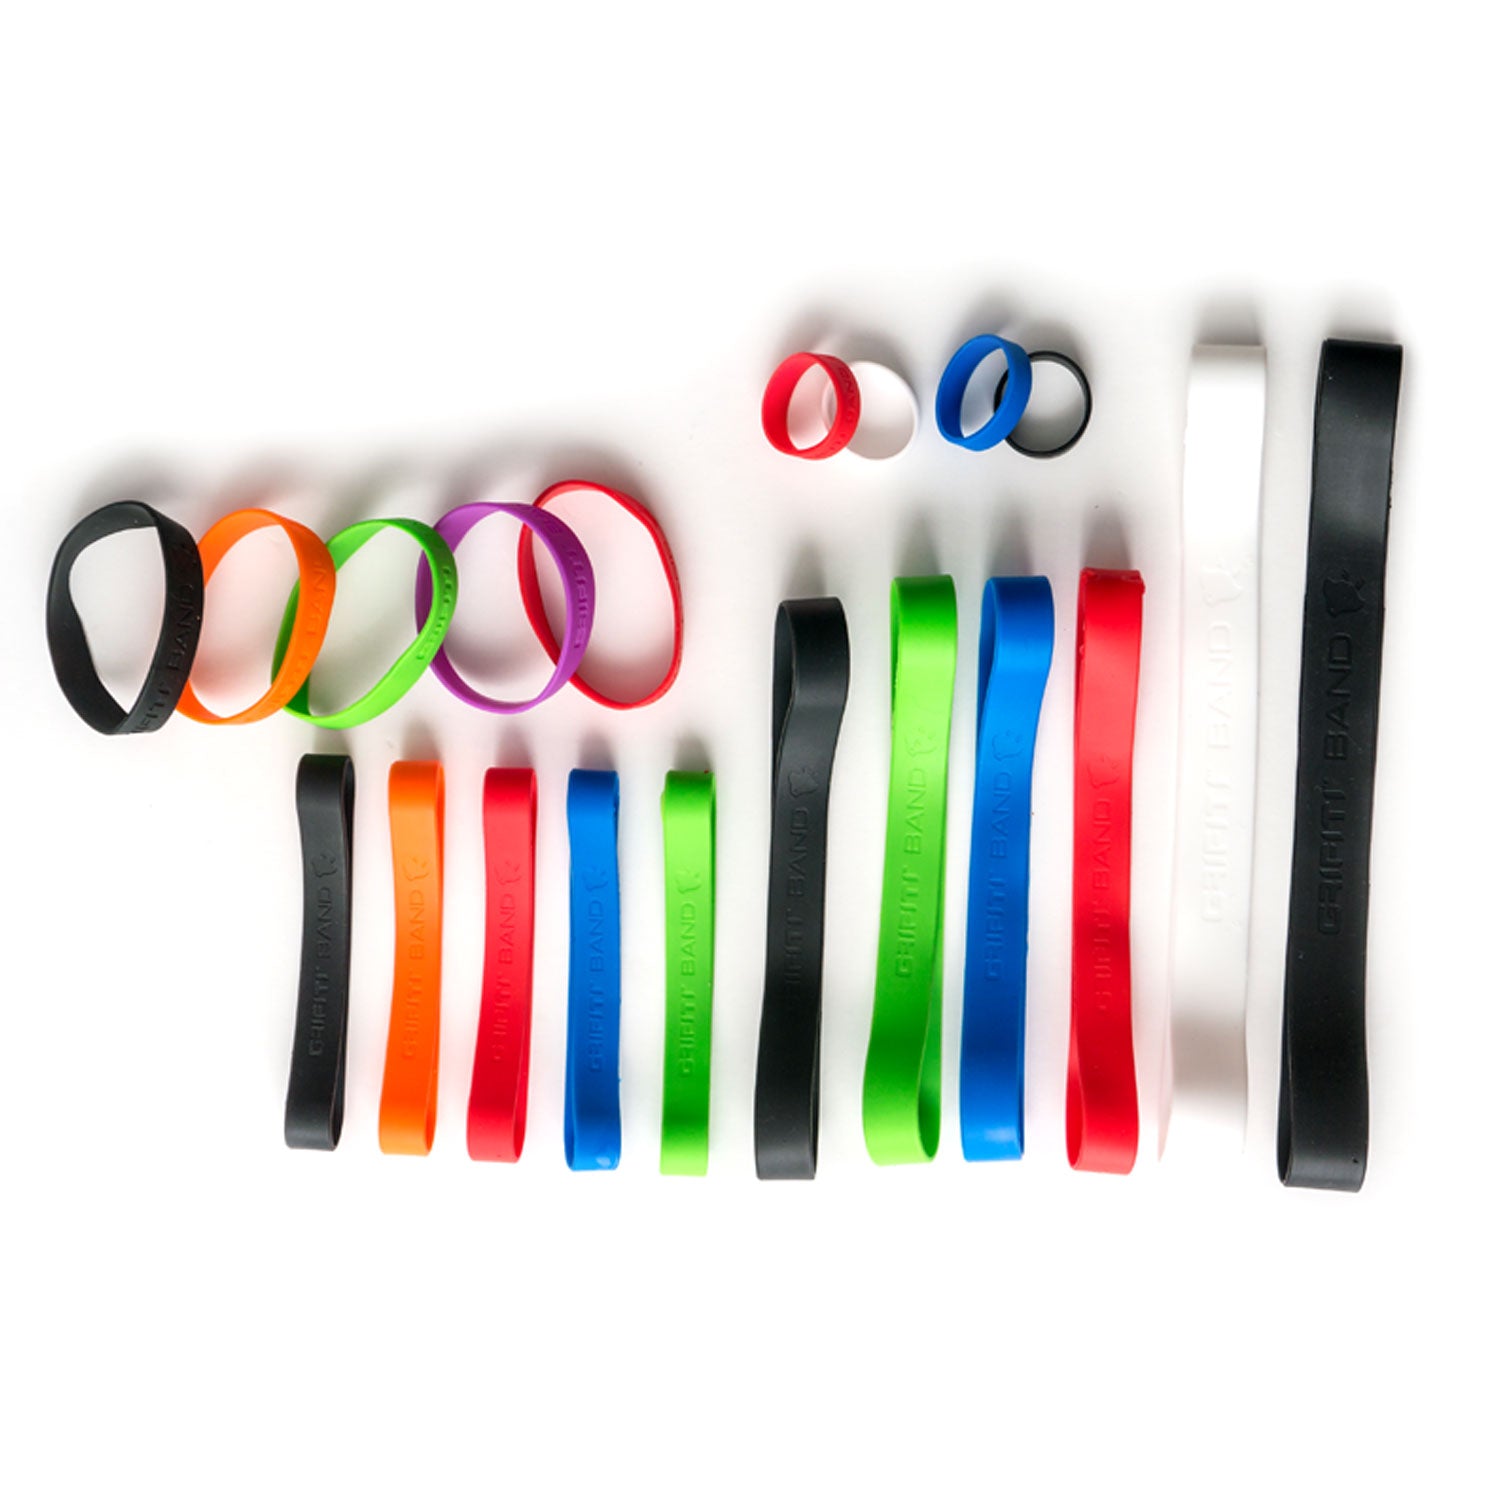 Grifiti Band Joes Silicone Bands Cooking Wrapping Grips Bundles Assorted Sizes 20 Pack Standard Style - Grifiti